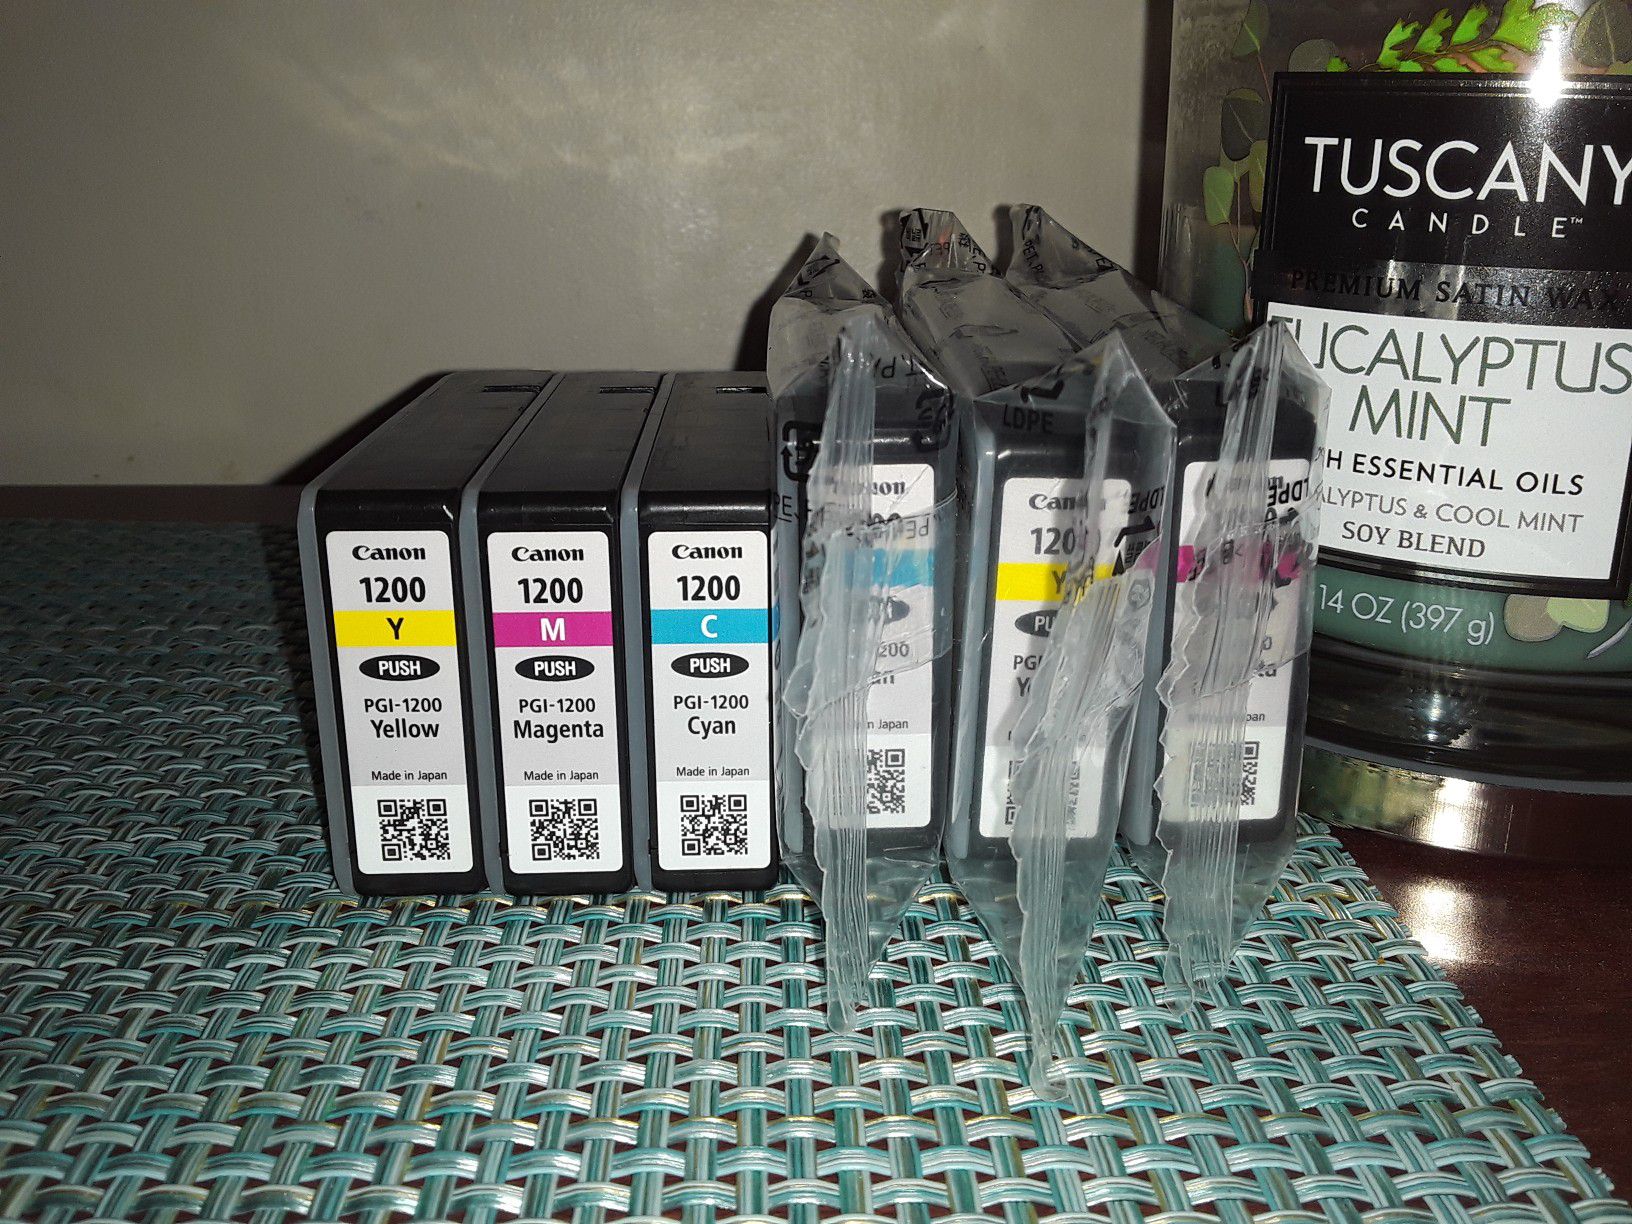 CANON Printer Color Ink Cartridges! Great Big Savings on 6! NEW & Packaged, Sealed!